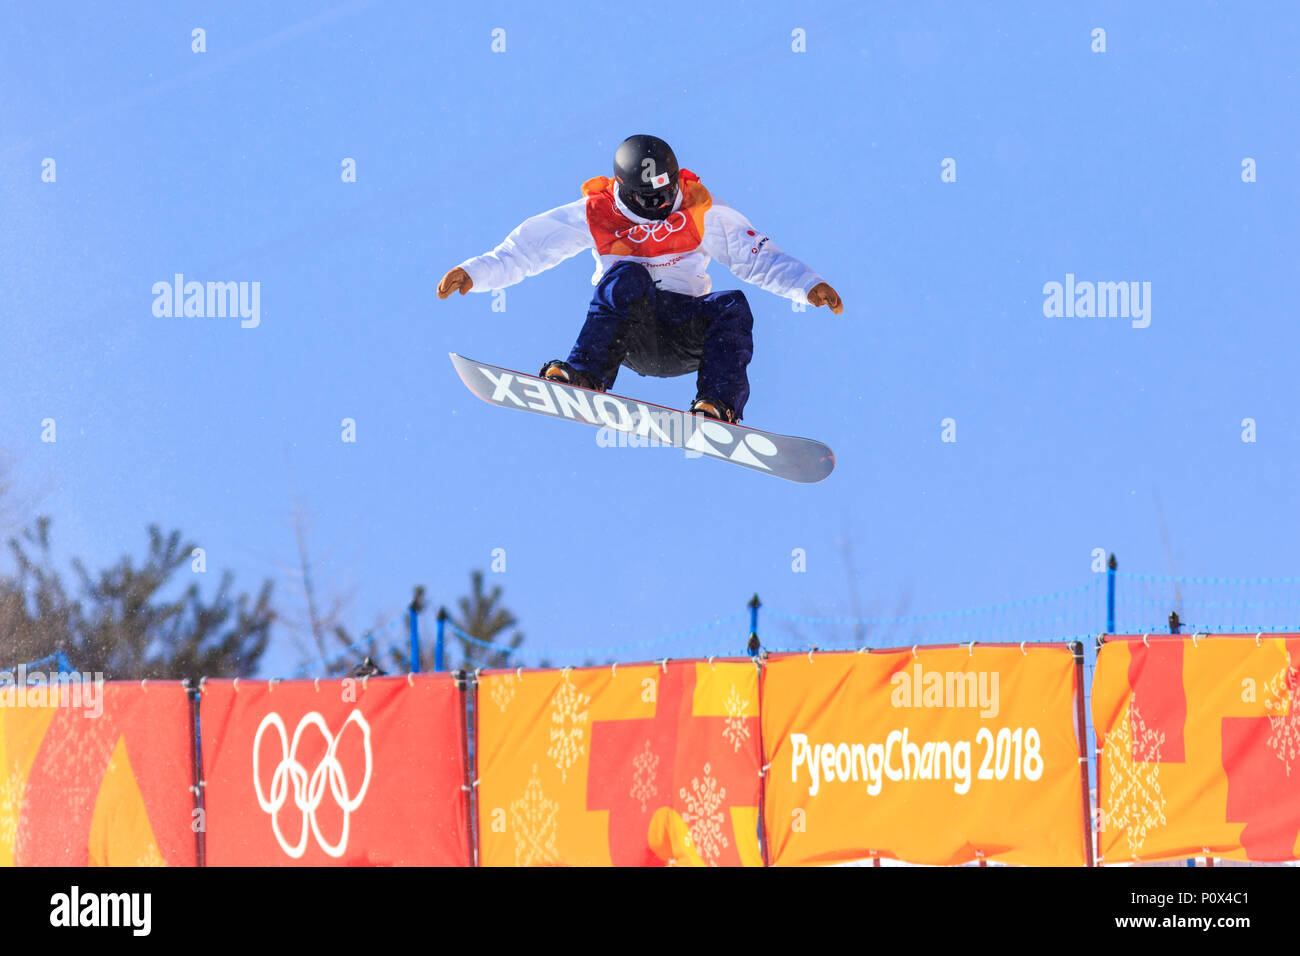 Yuto Totsuka (JPN) competing in  the Men's Snowboarding Half Pipe Qualification at the Olympic Winter Games PyeongChang 2018 Stock Photo